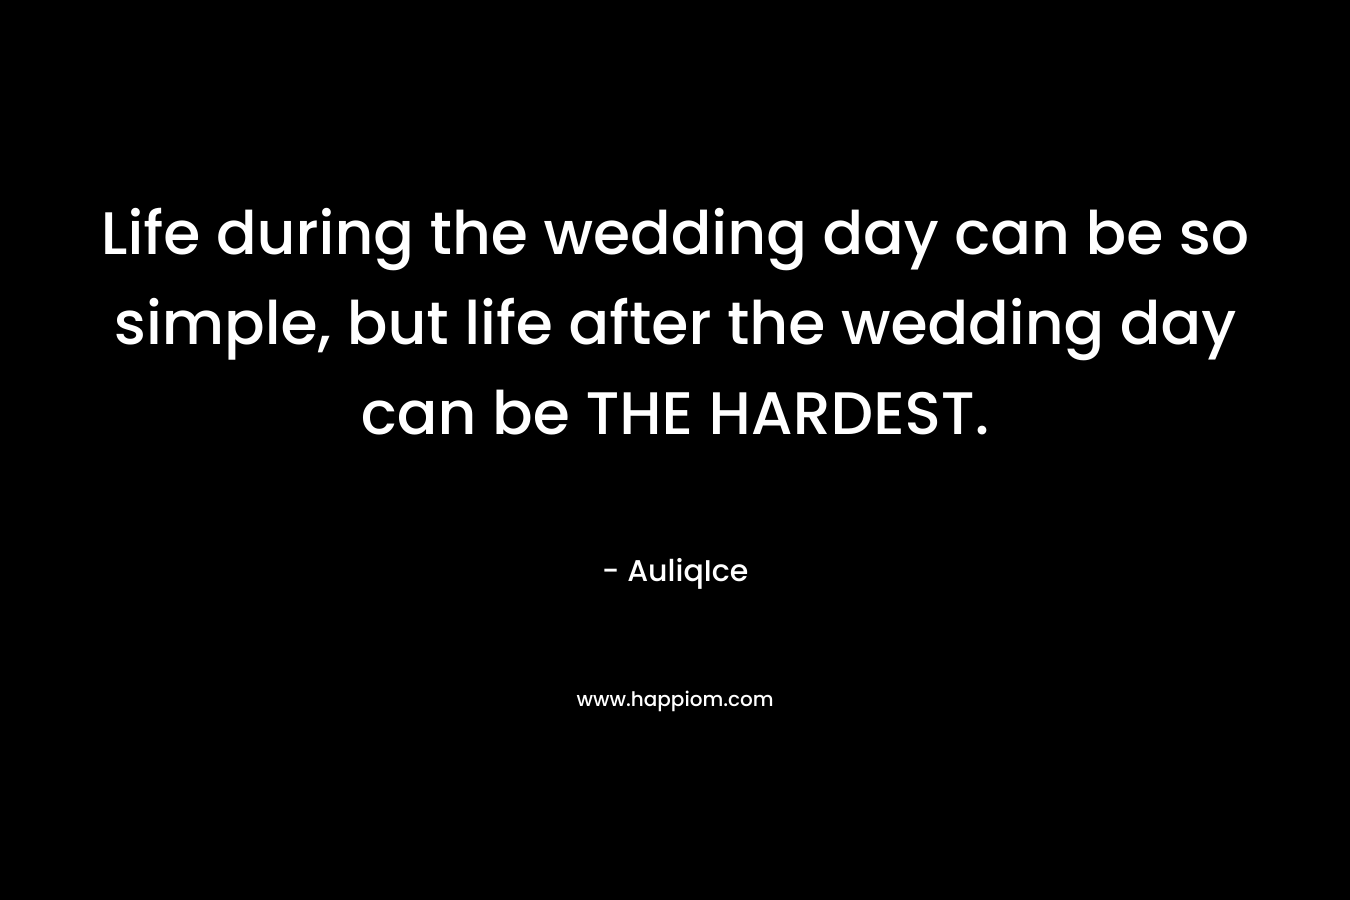 Life during the wedding day can be so simple, but life after the wedding day can be THE HARDEST.